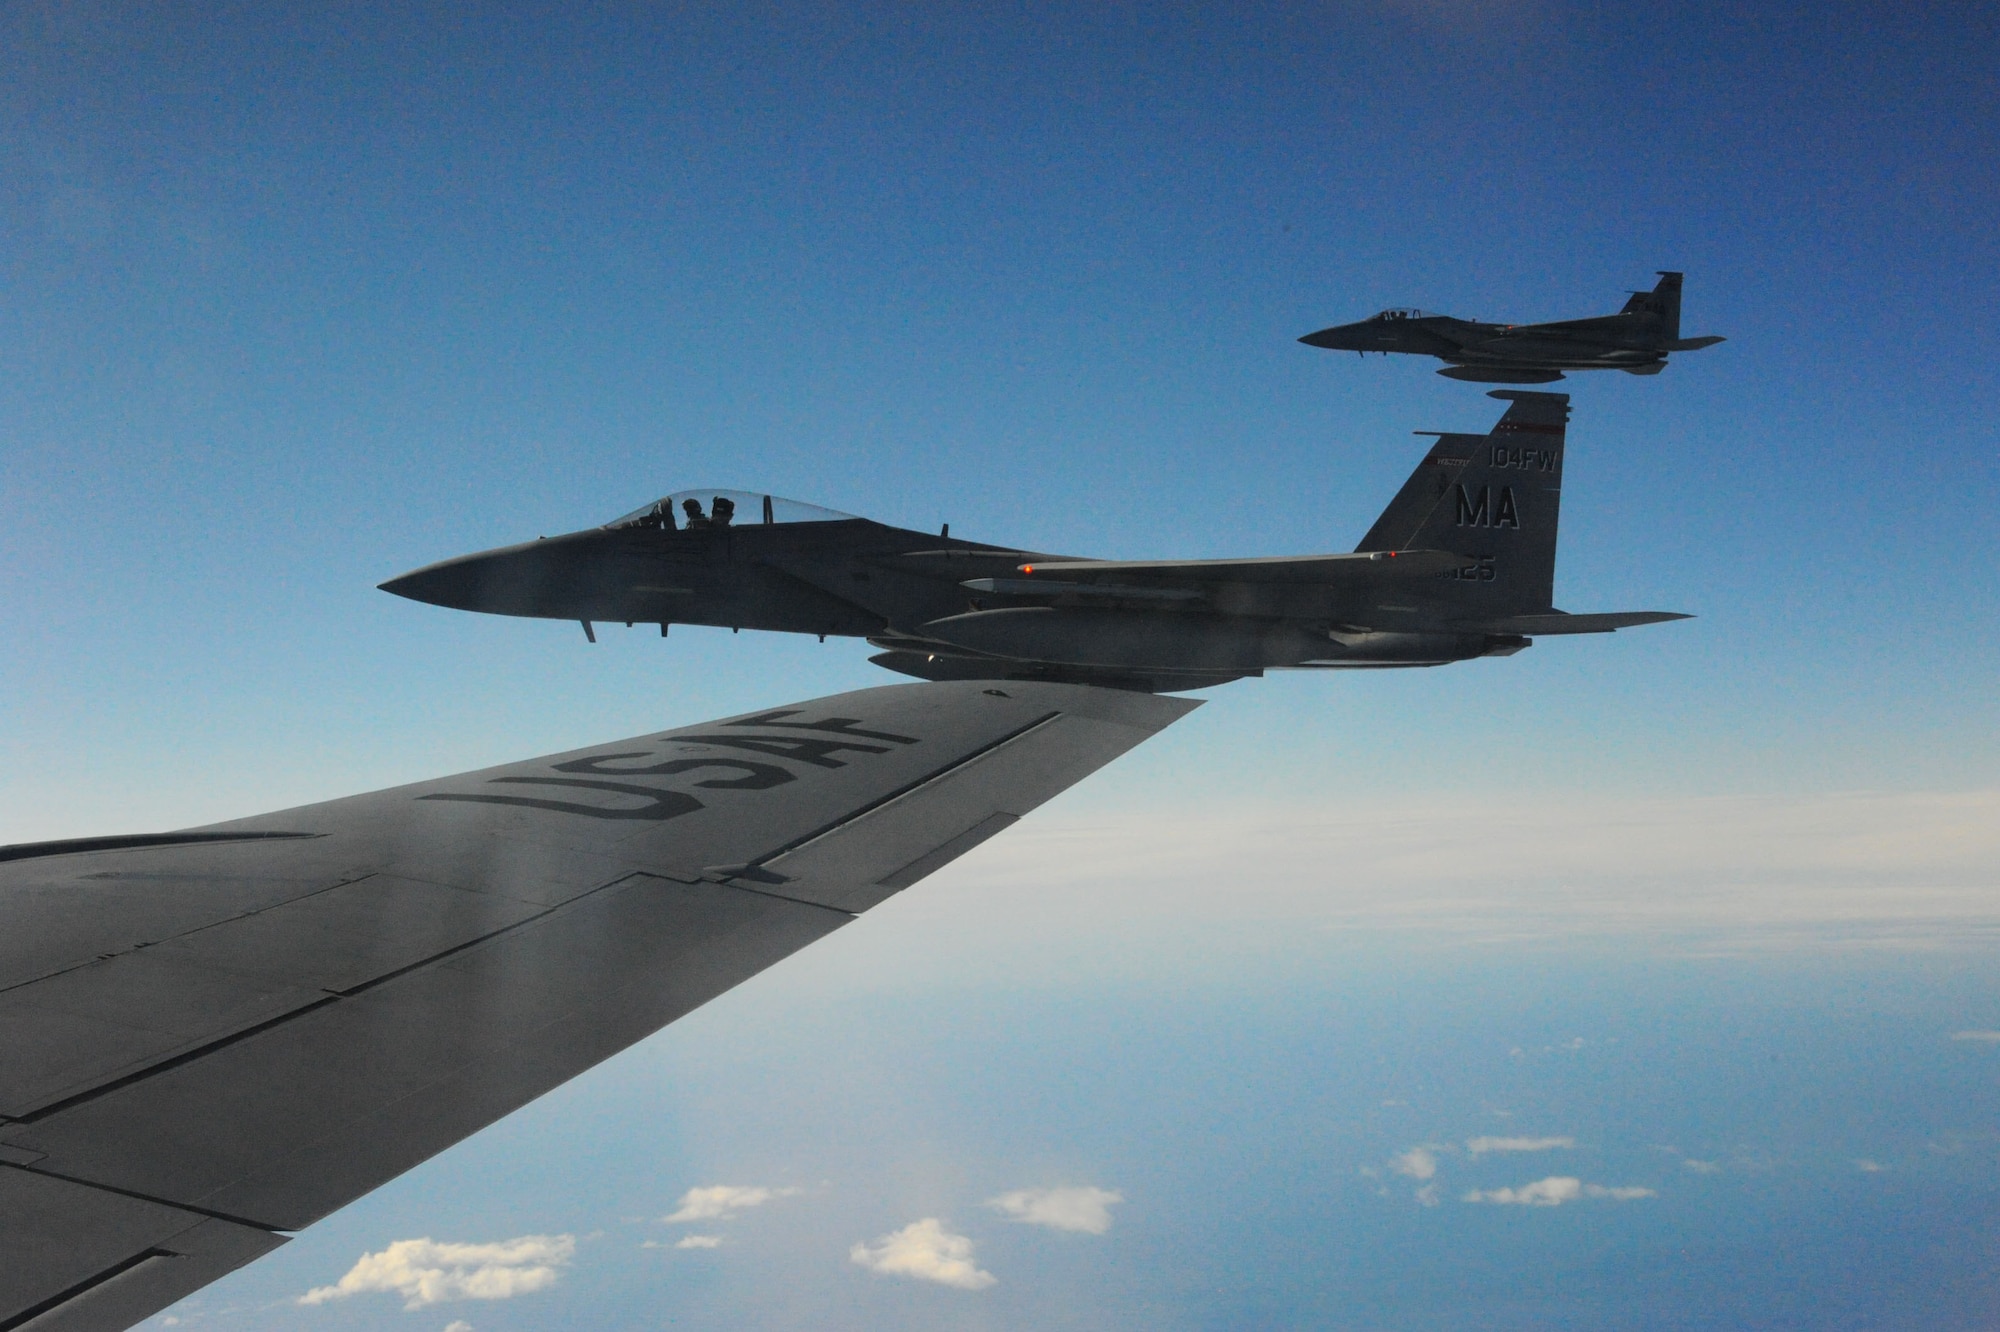 Two U.S. Air Force F-15C Eagle fighter aircraft assigned to the 104th Fighter Wing, Barnes Air National Guard Base, Mass., fly alongside a U.S. Air Force KC-135 Stratotanker from the 916th Air Refueling Wing, Air Force Reserve Command, Seymour Johnson, N.C. after taking fuel in the skies over Iceland while conducting Air Surveillance operations. Deterrence missions such as this communicates that the U.S. is serious about security and stability in the region. (U.S. Air Force photo by Master Sgt. Kevin Nichols/Released)